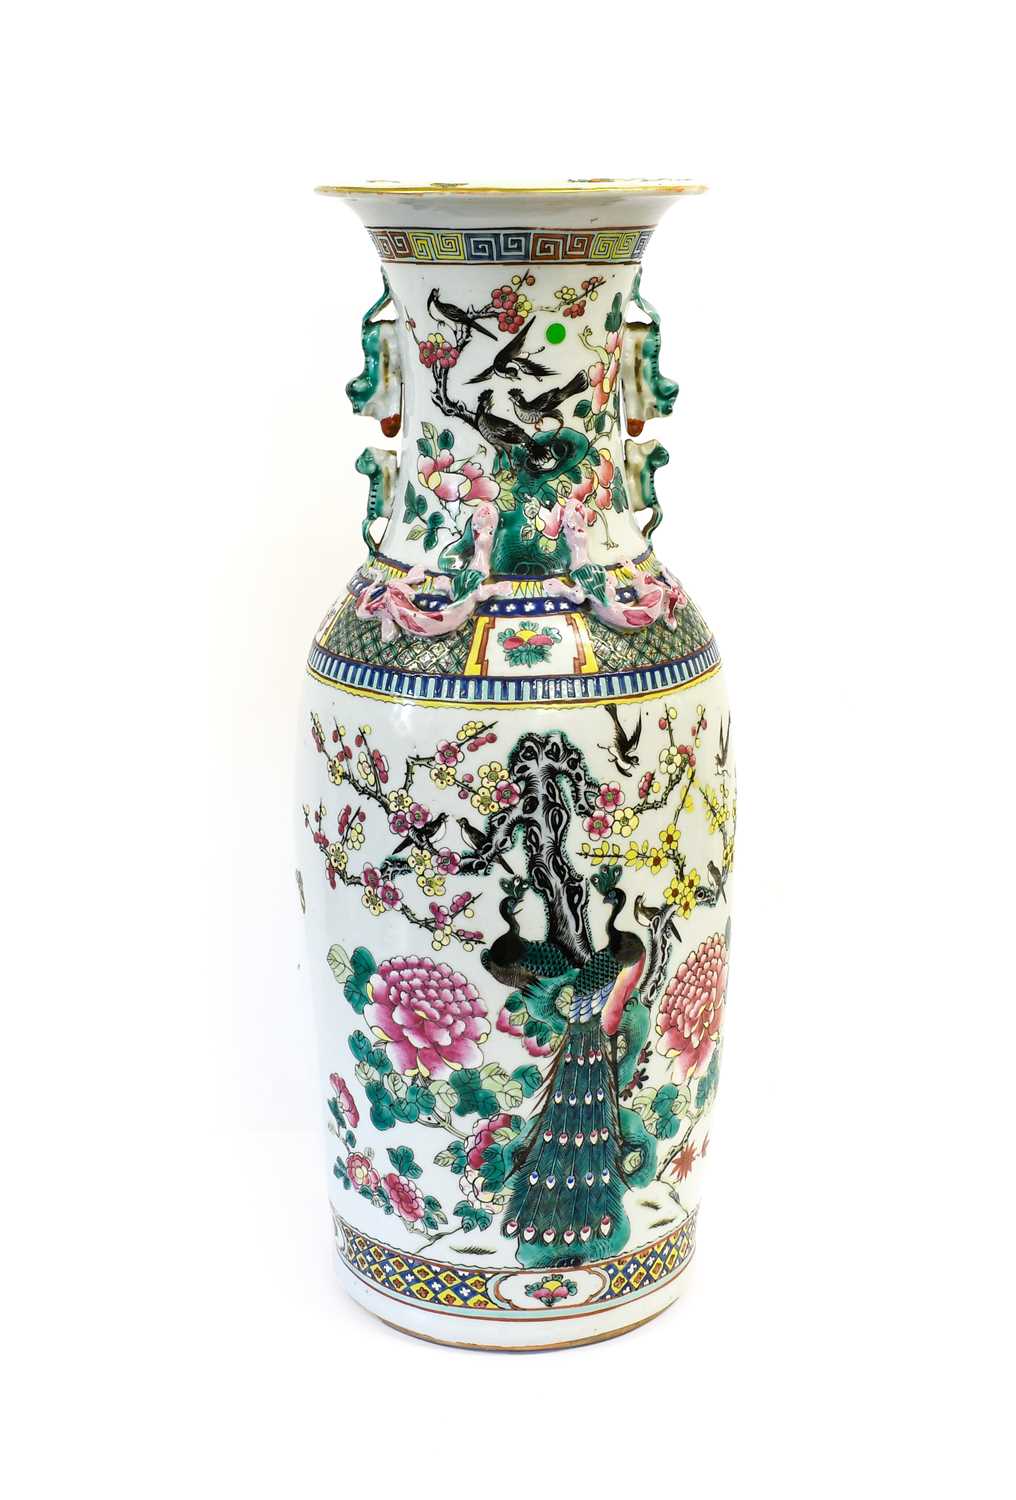 A Chinese Porcelain Vase, mid 19th century, of baluster form, the trumpet neck applied with mythical